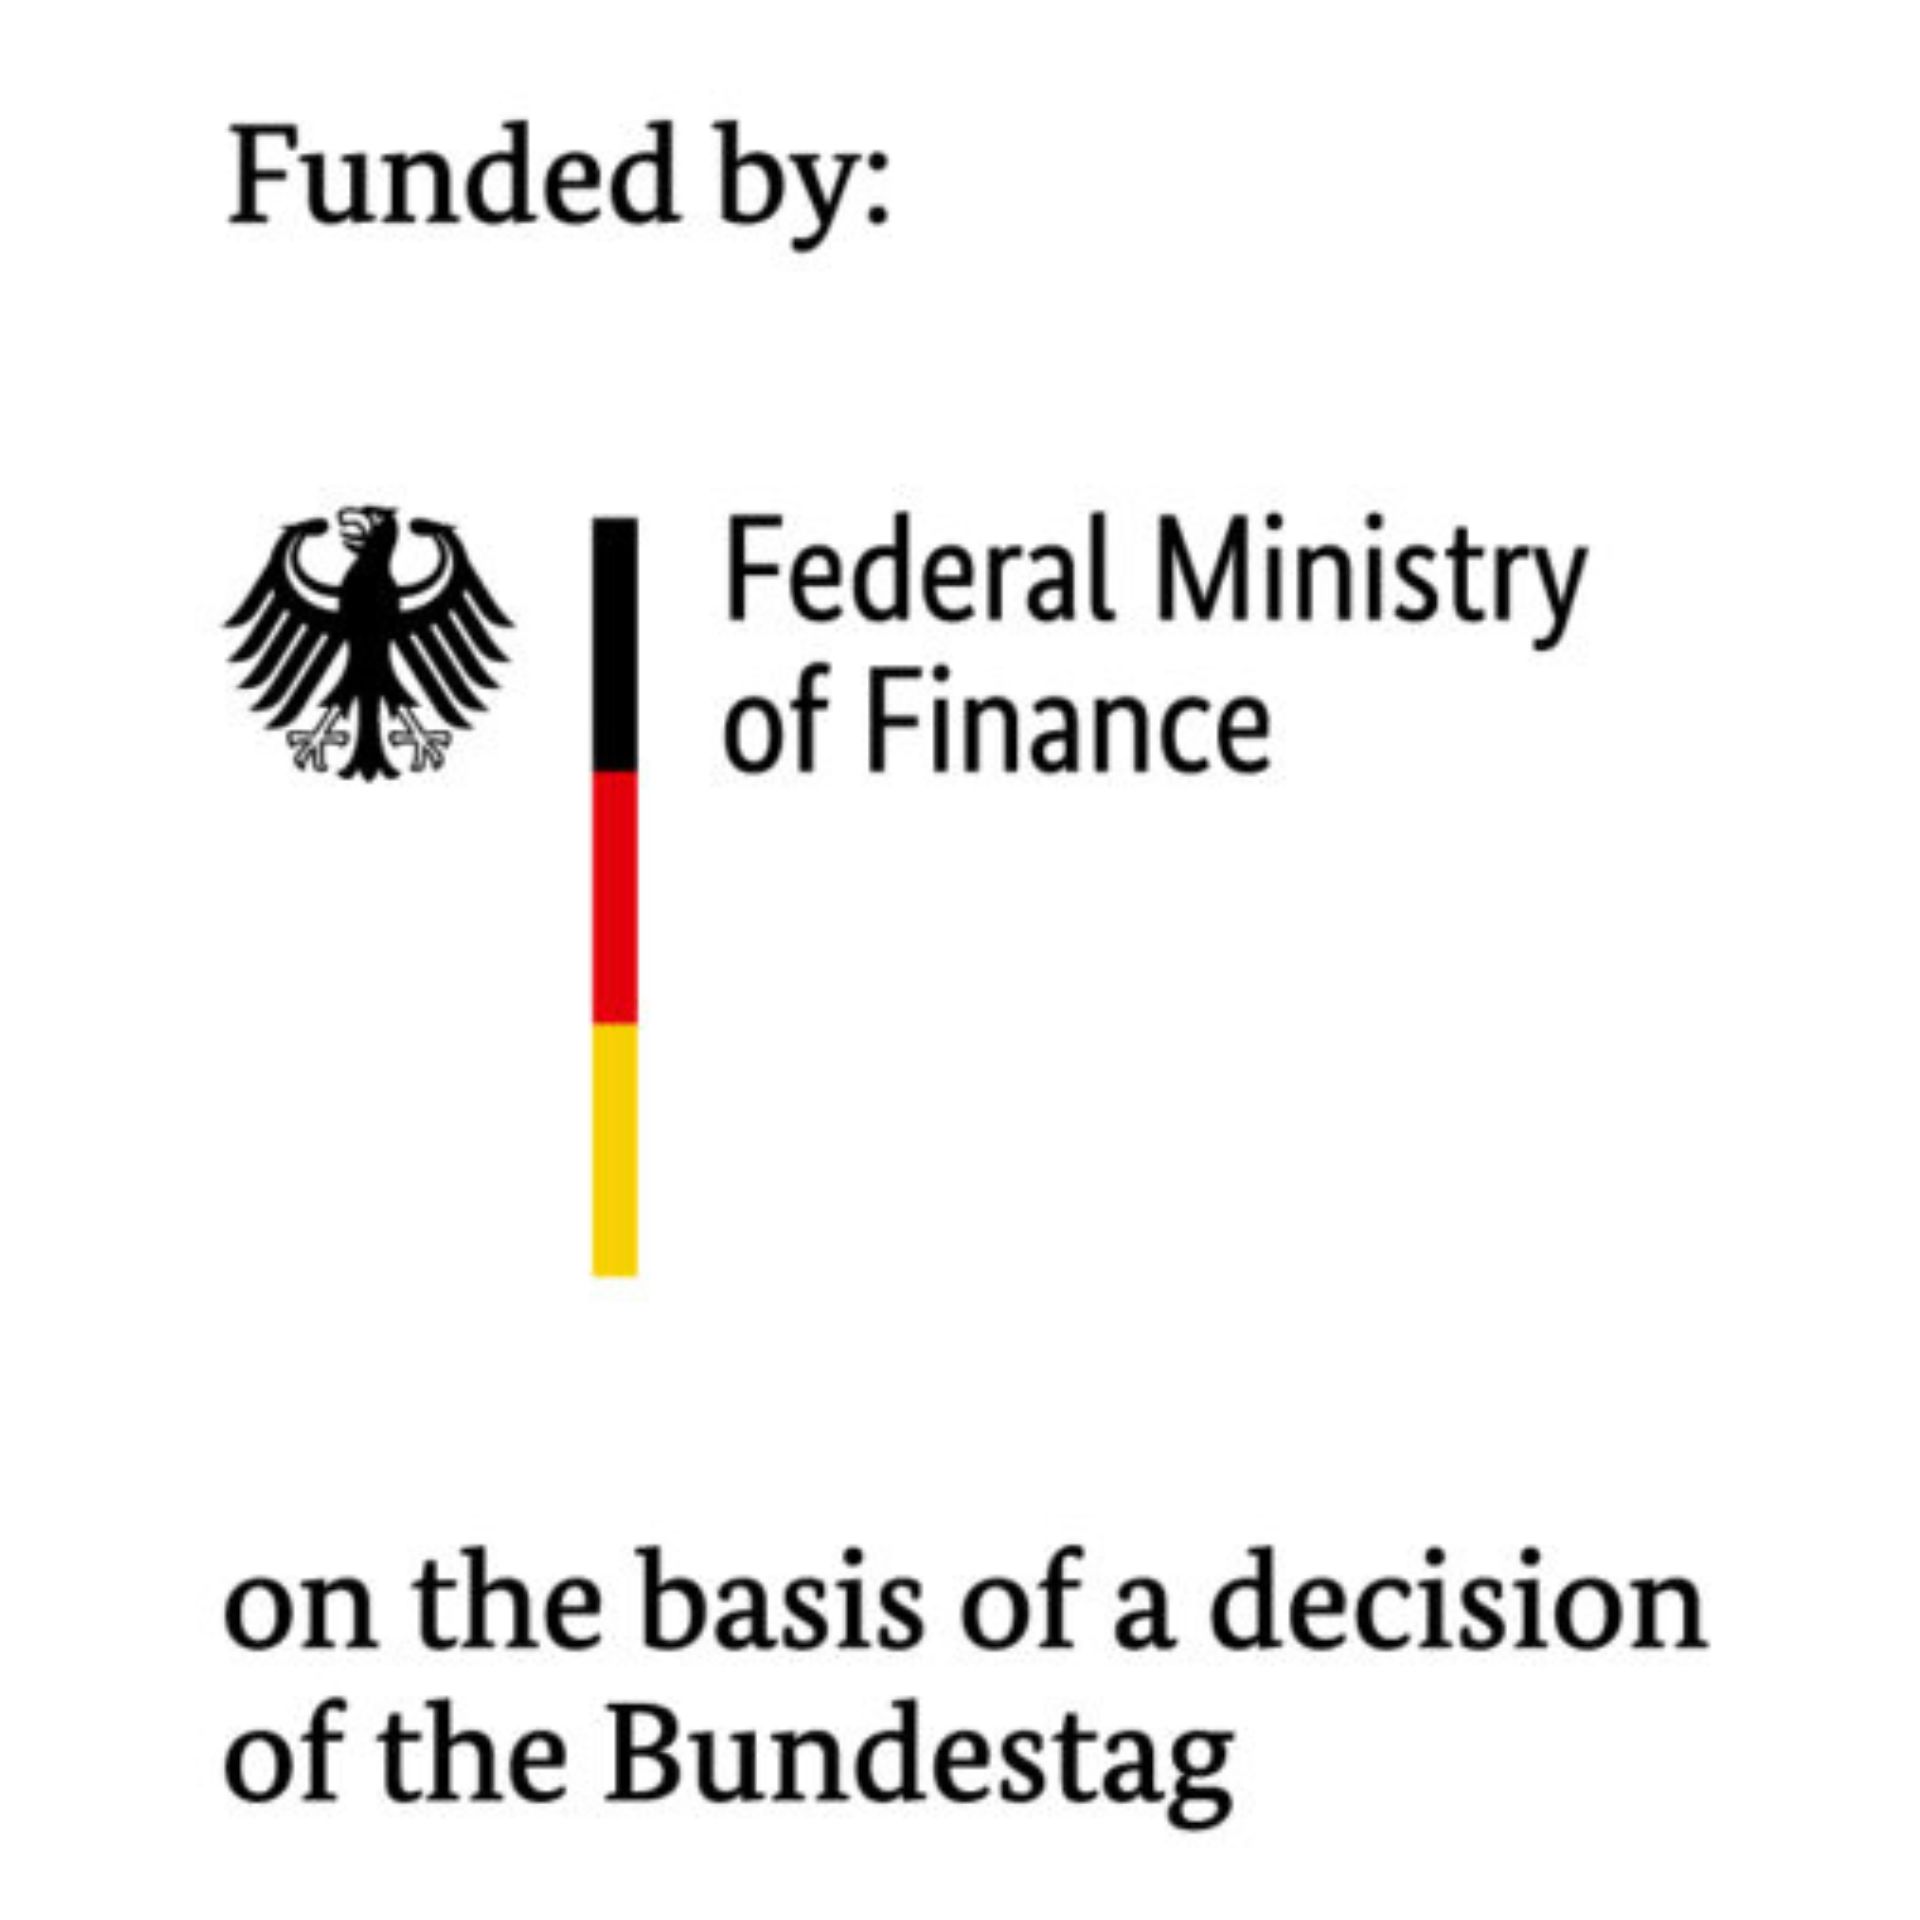 German Federal Ministry of Finance